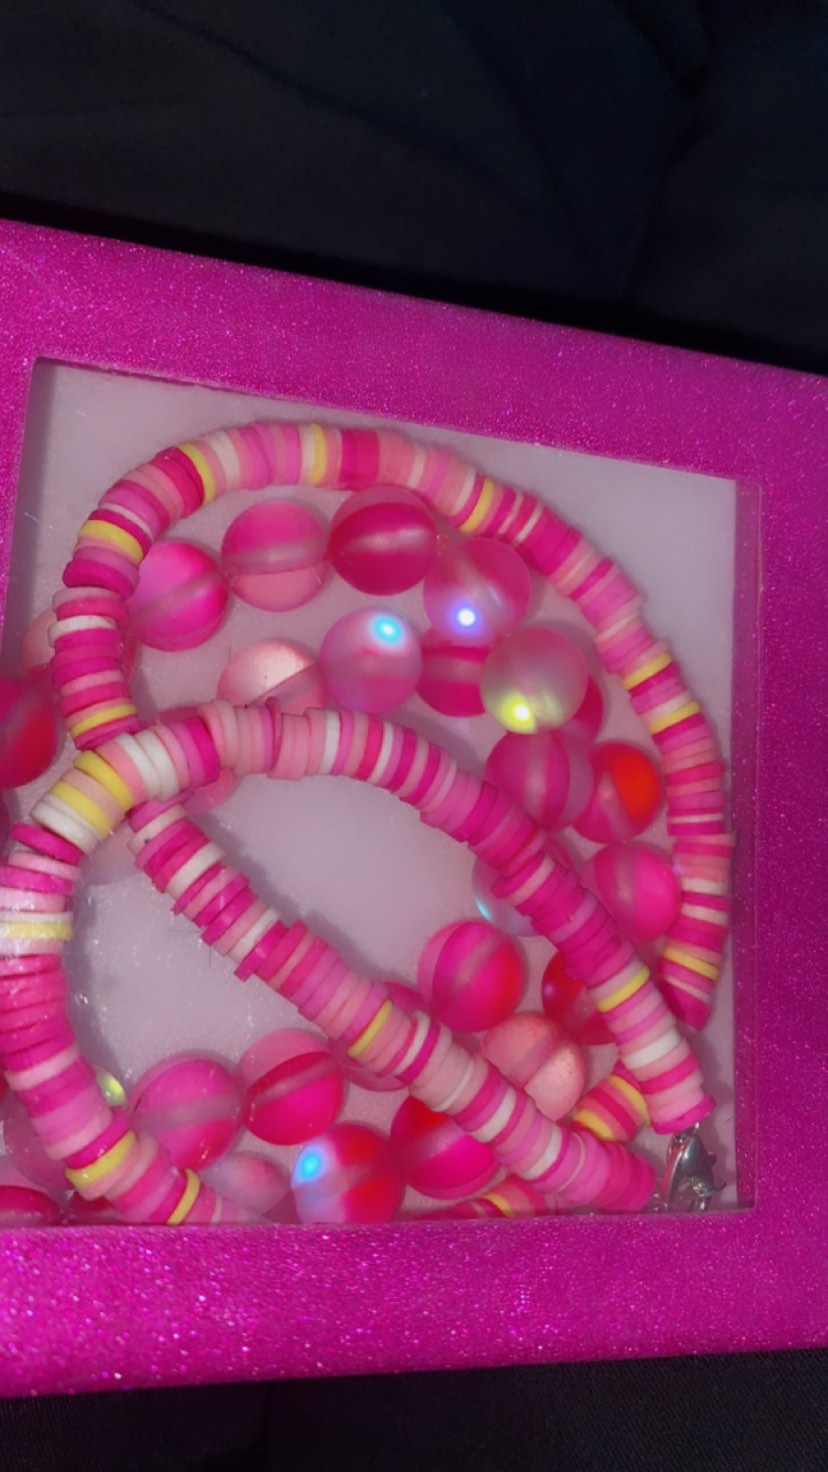 Close-up of a box of colorful beads, predominantly in shades of pink and yellow, on a box.